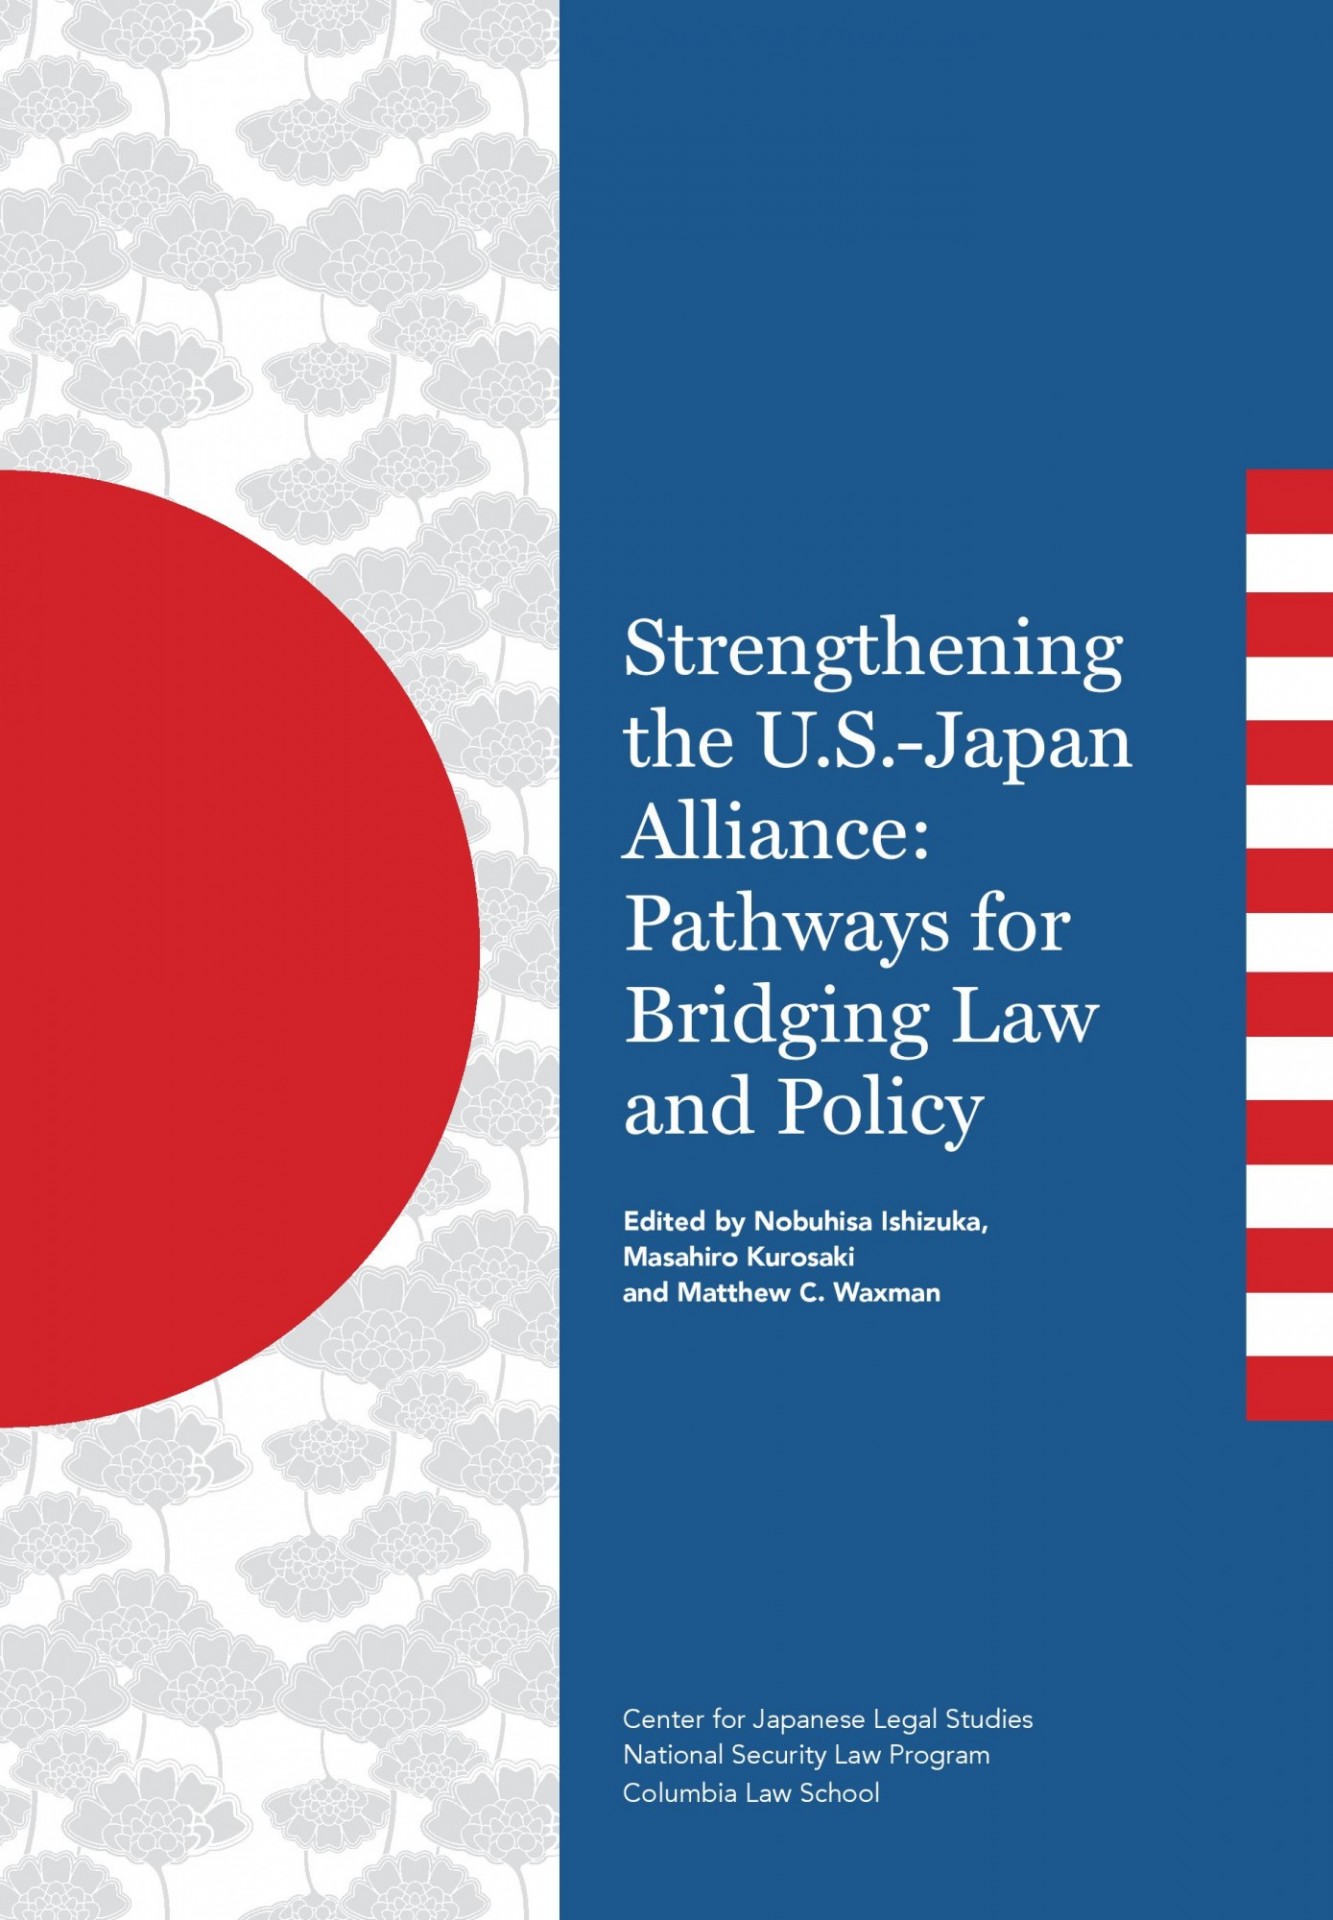 Strengthening the U.S.-Japan Alliance: Pathways for Bridging Law and Policy